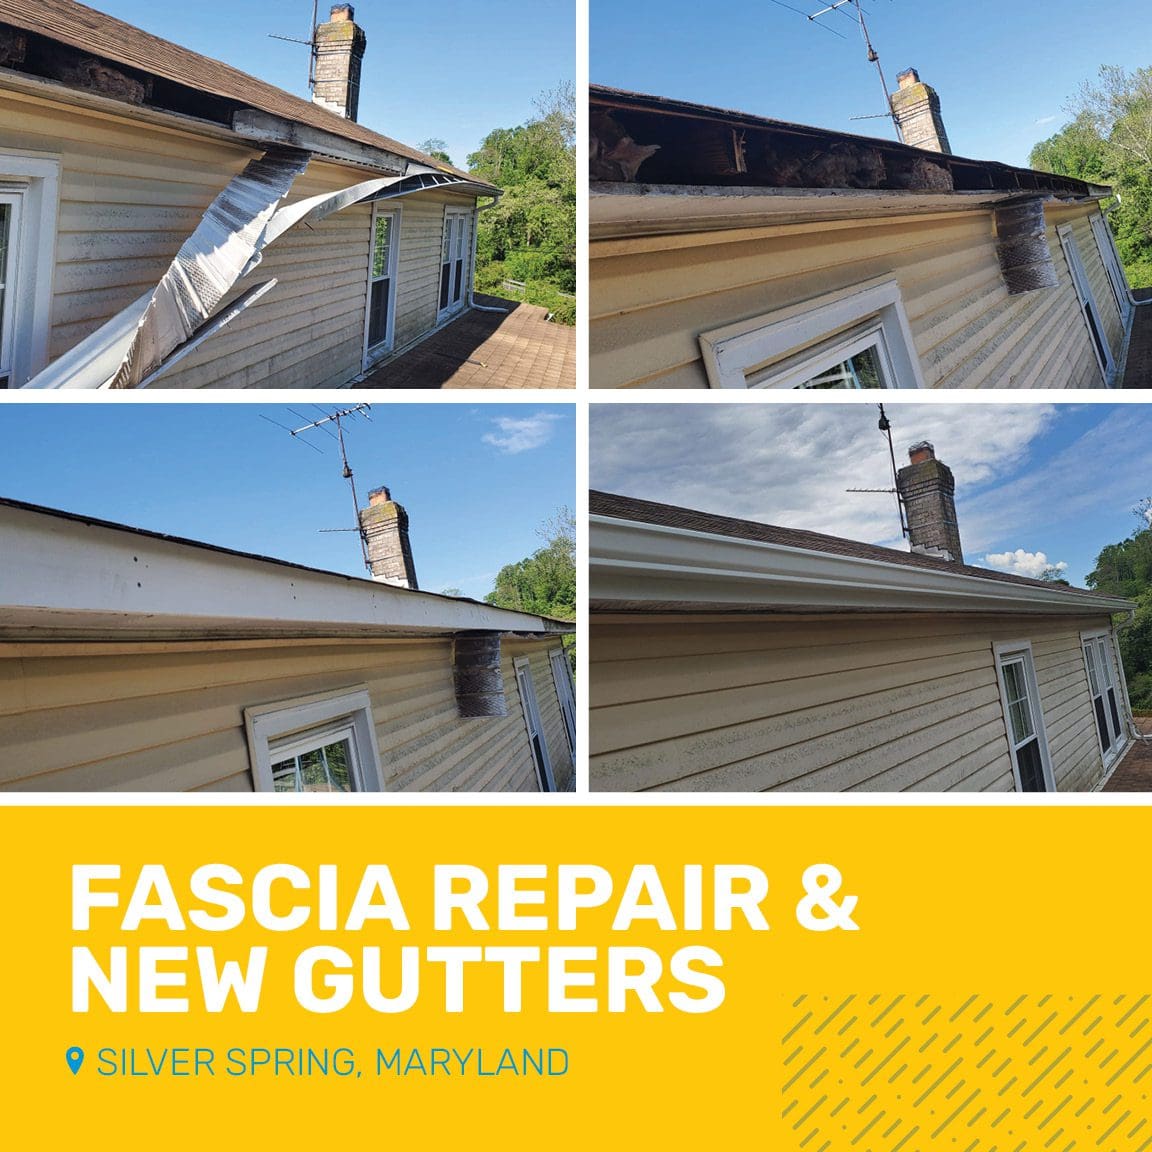 Fascia repair and new gutter installation in Silver Spring Maryland